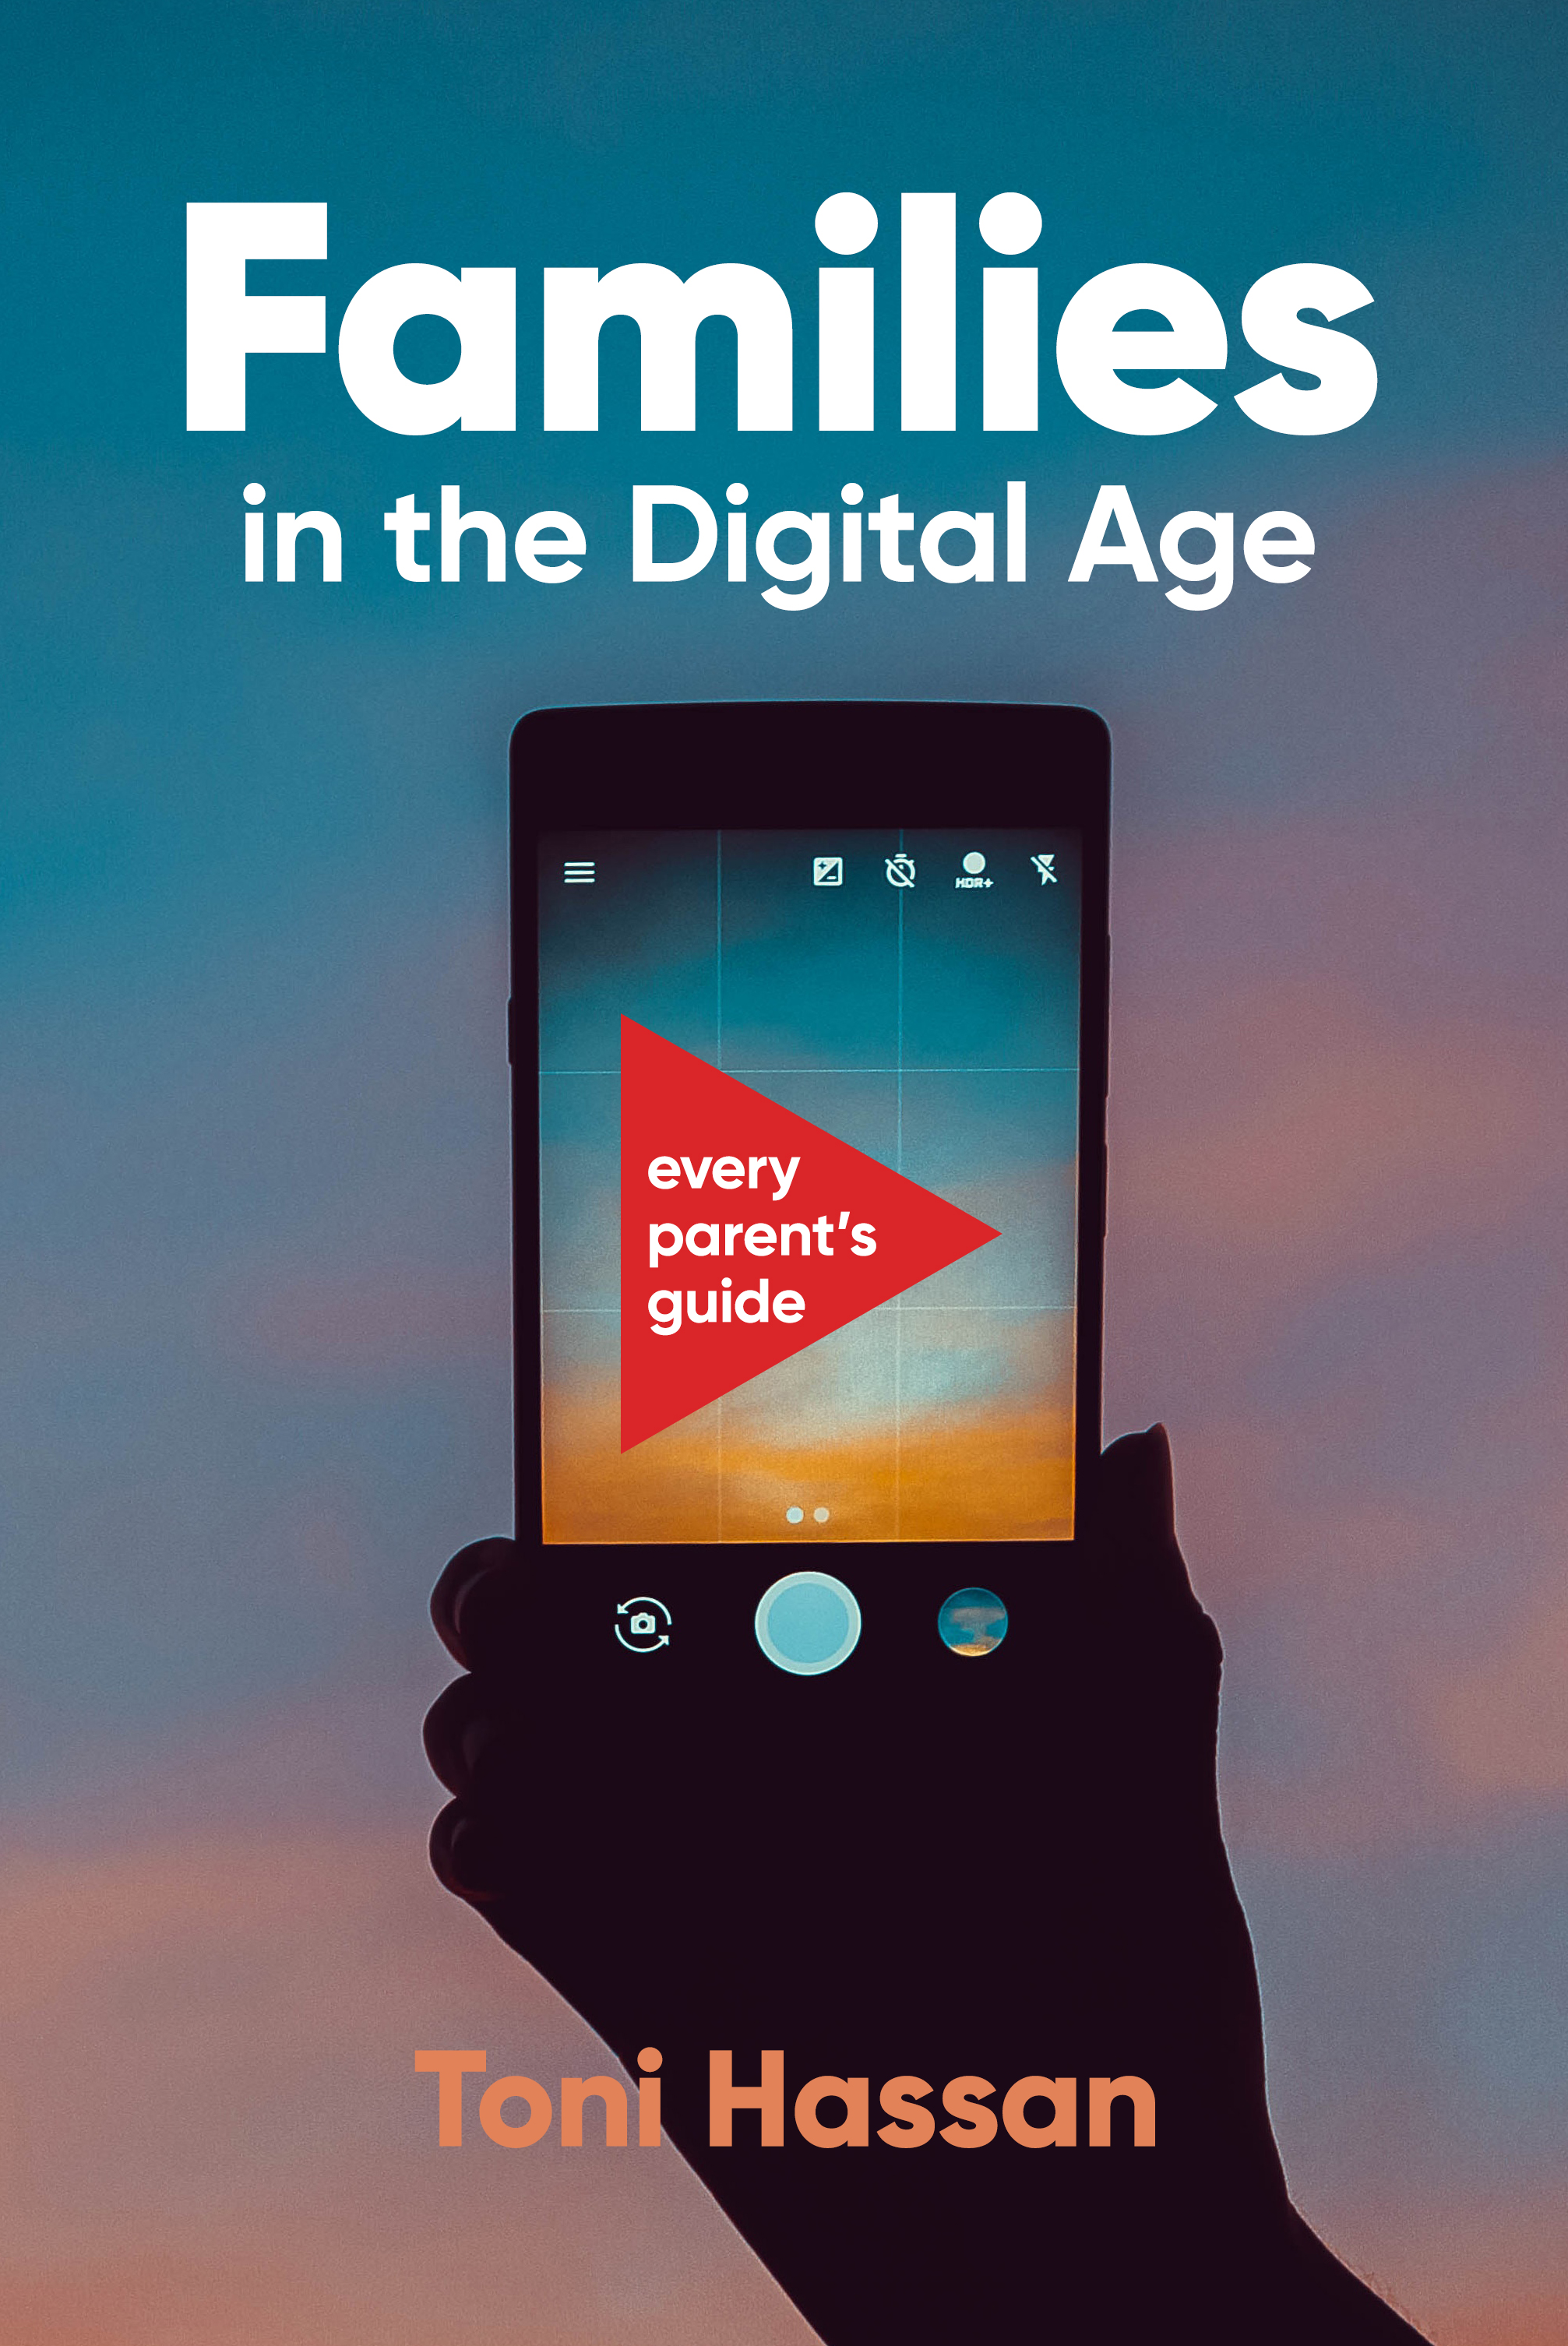 Families in the Digital Age_Cover 02.jpg